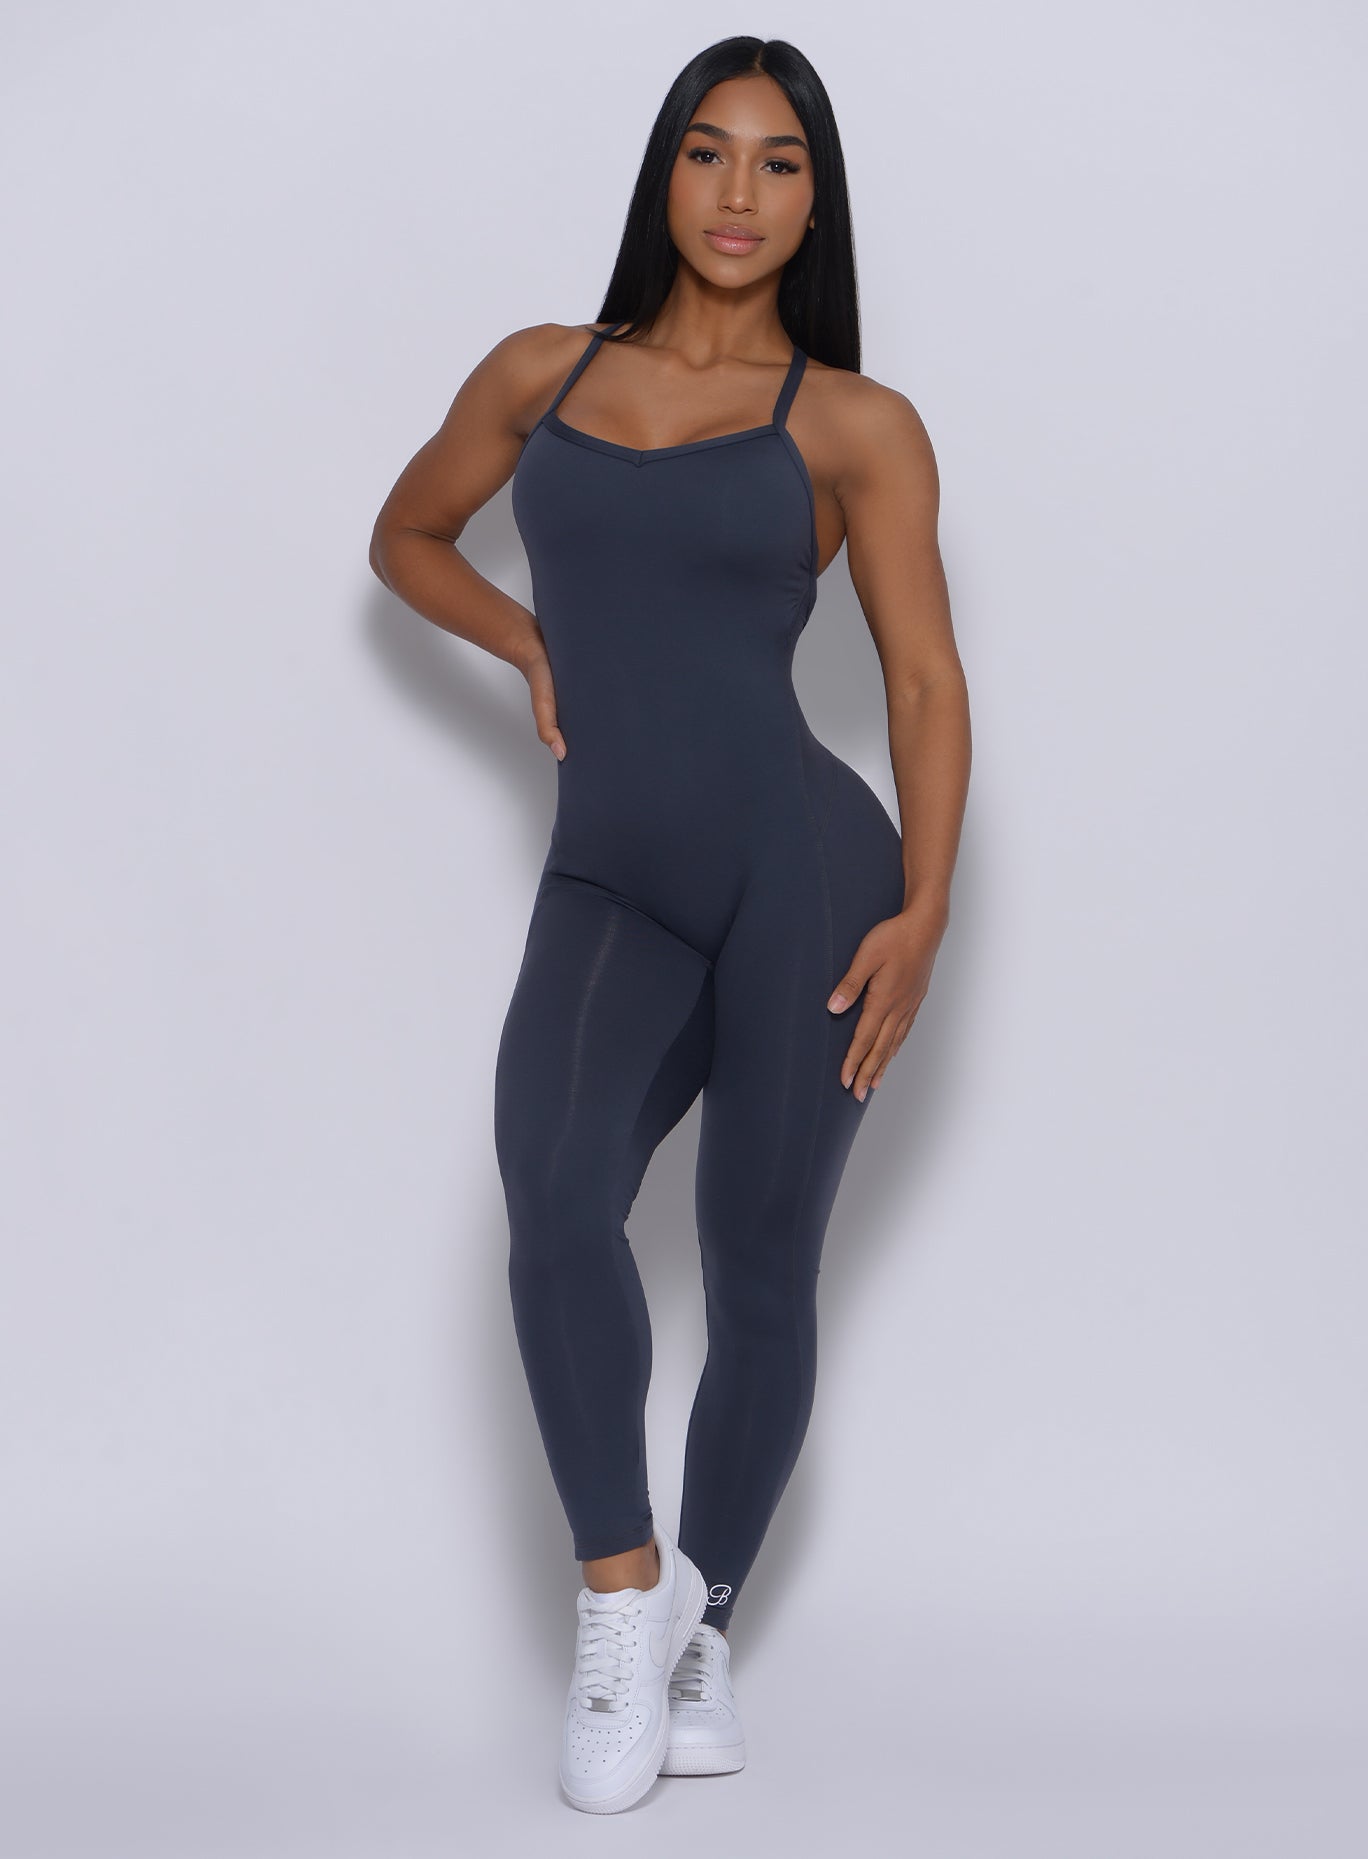 Moden facing forward wearing our sculpted bodysuit in summit gray color